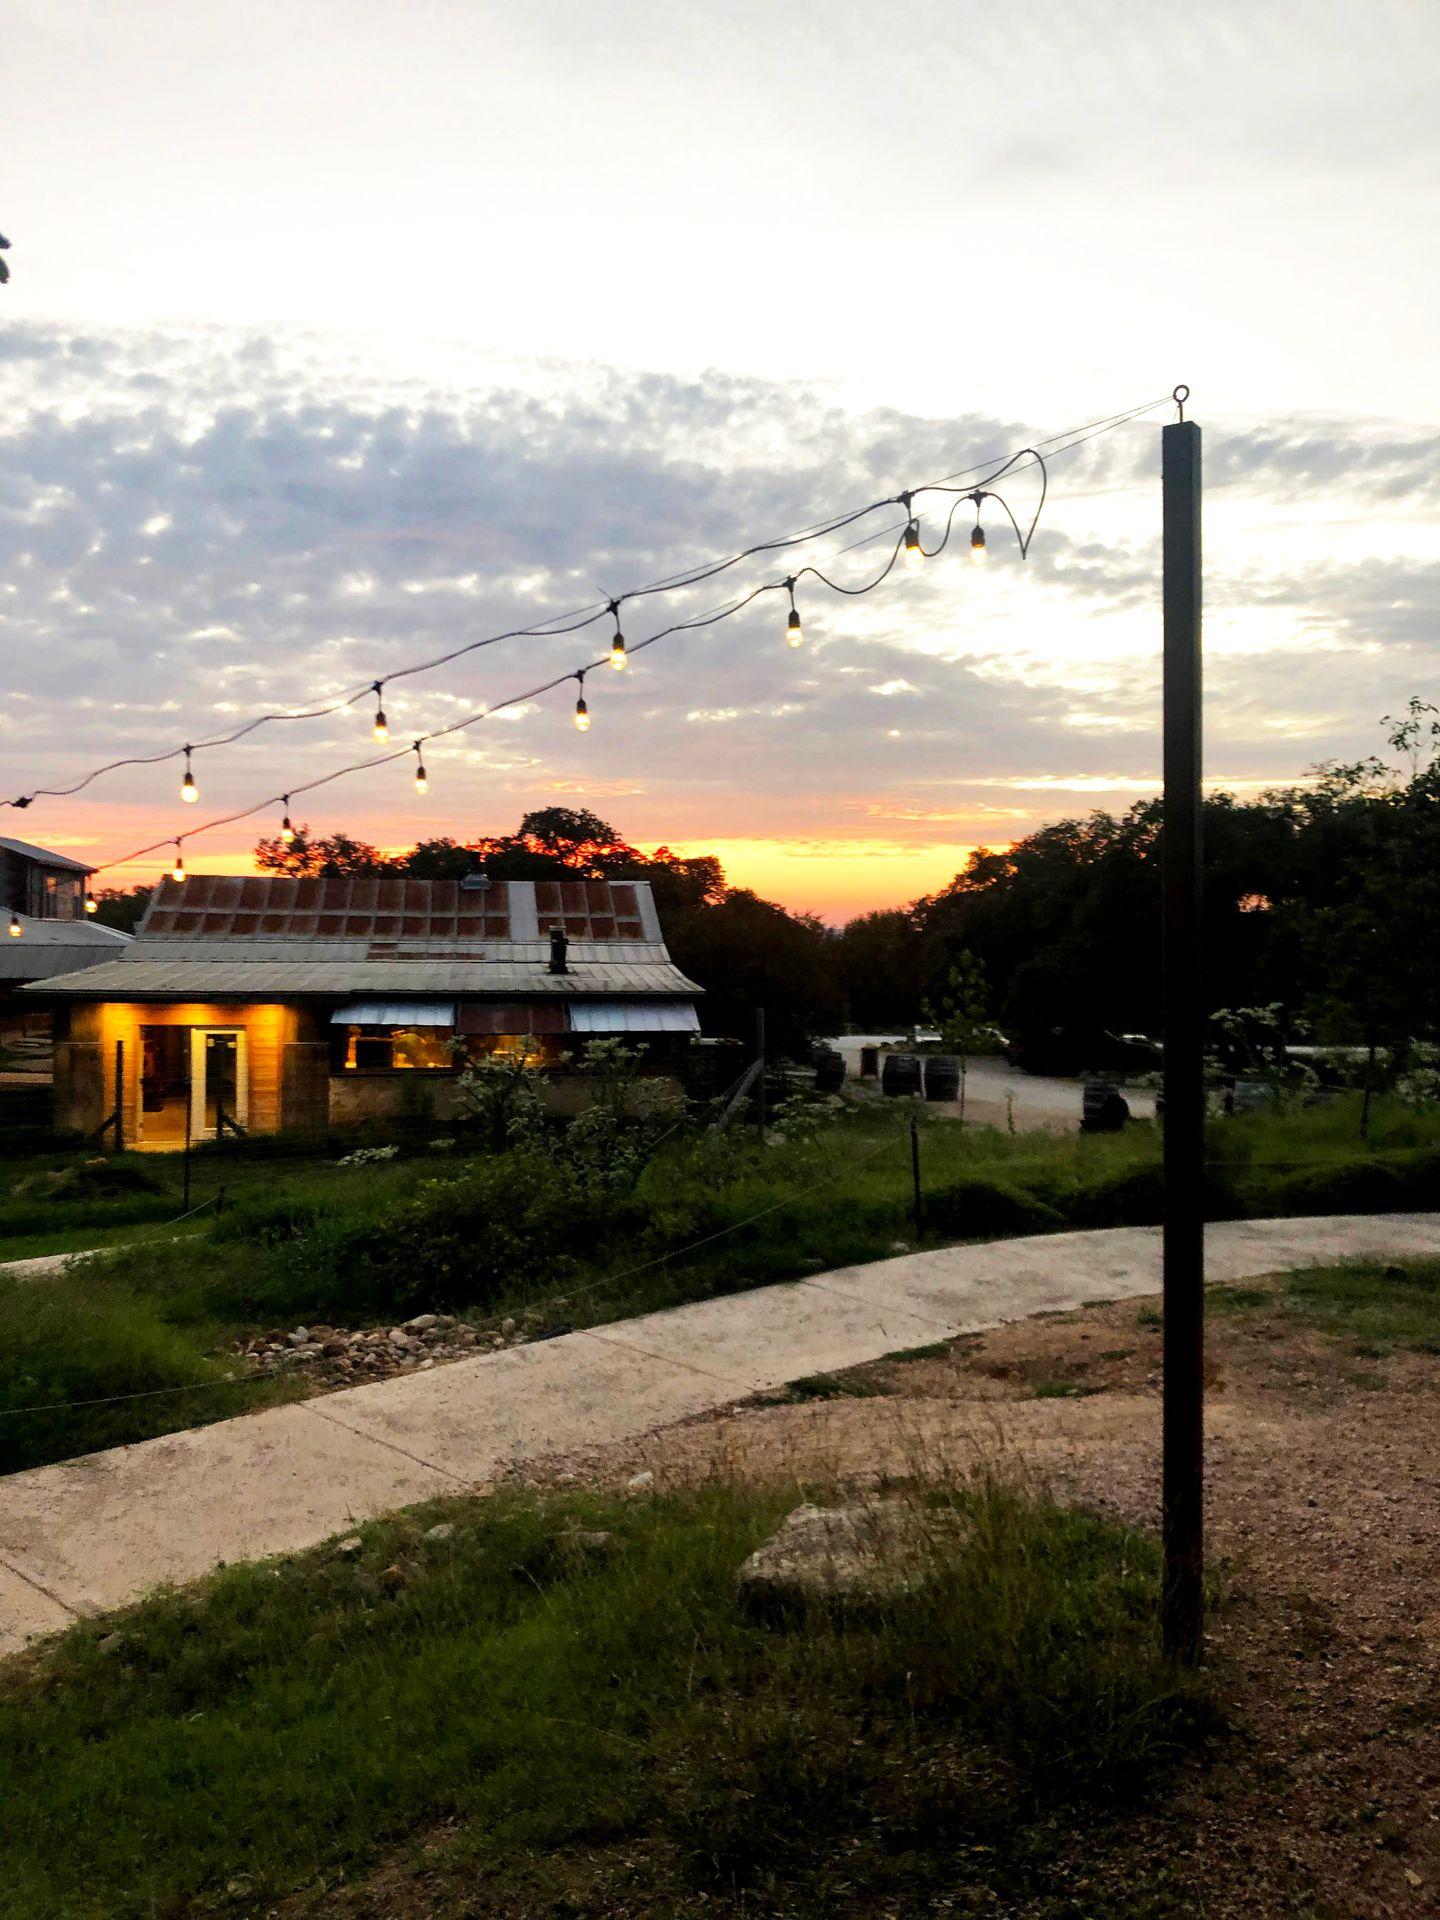 A view of the outside of Jester King Brewery during sunset.